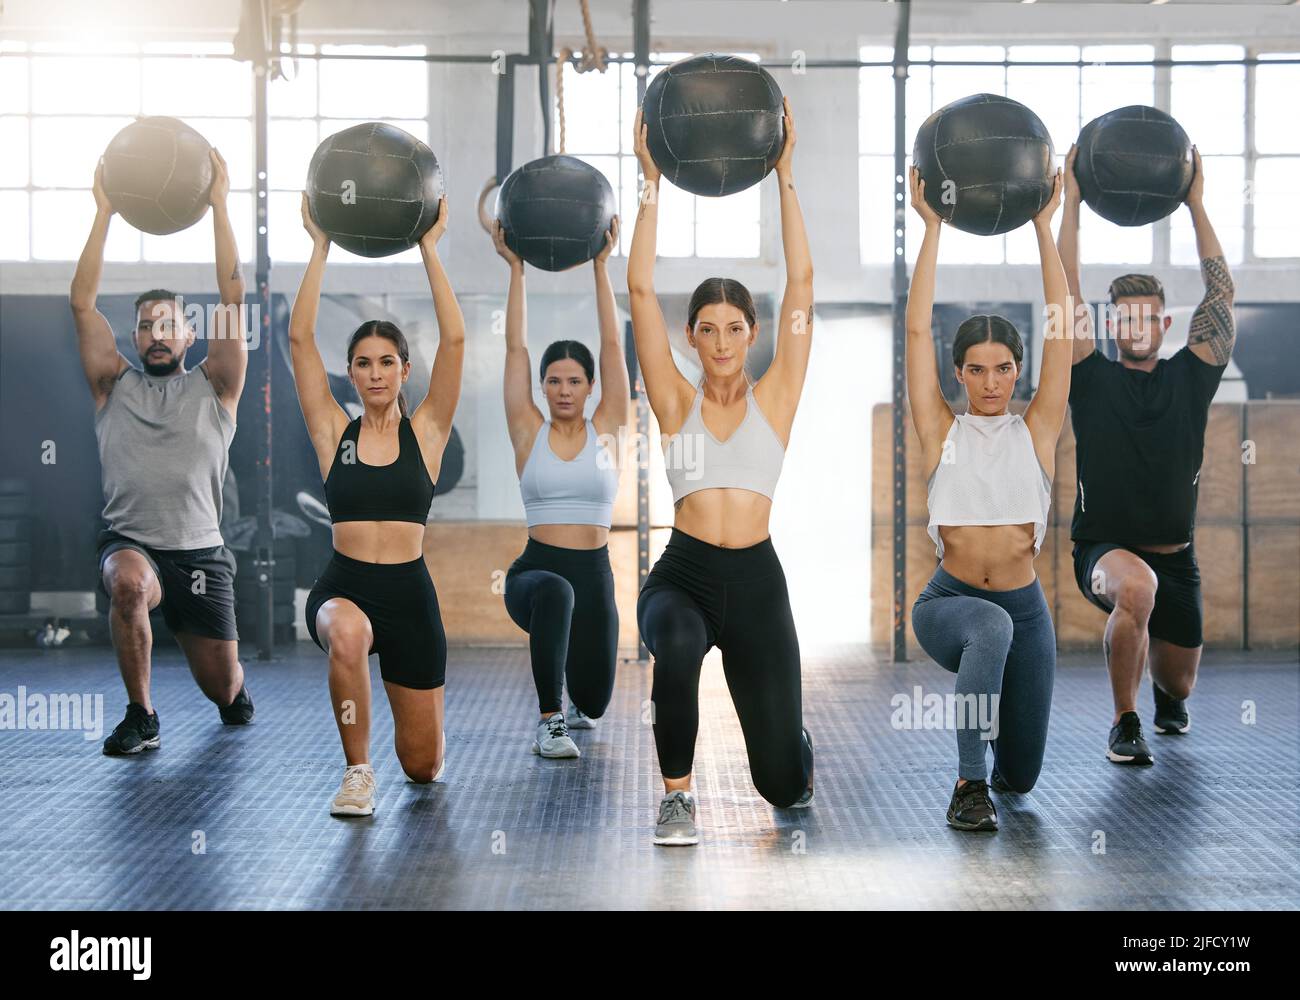 Diverse group of active young people doing overhead medicine ball lunge exercises while training together in a gym. Focused athletes challenging Stock Photo